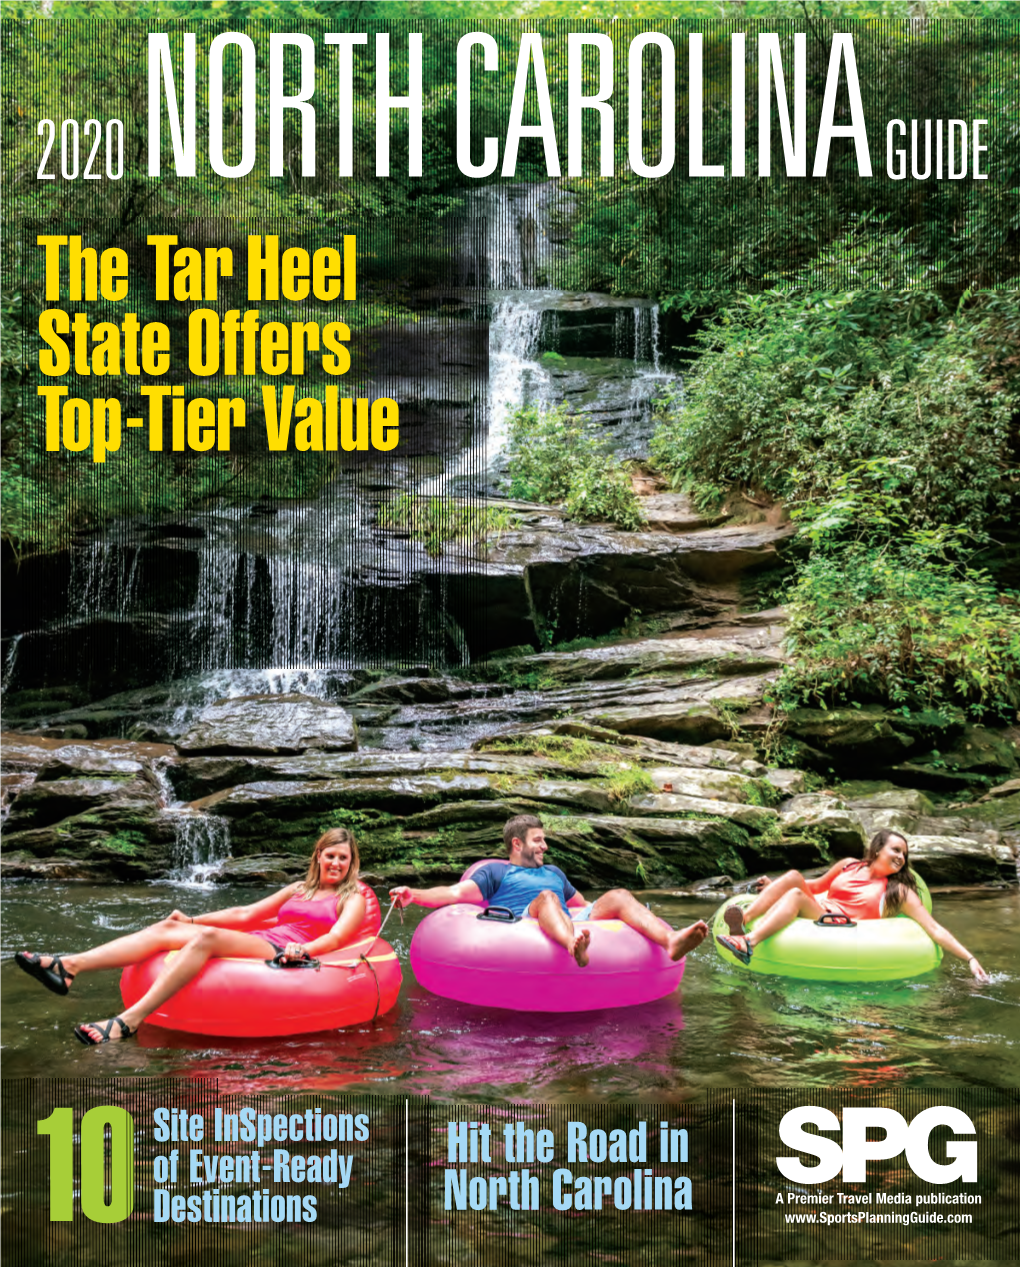 The Tar Heel State Offers Top-Tier Value